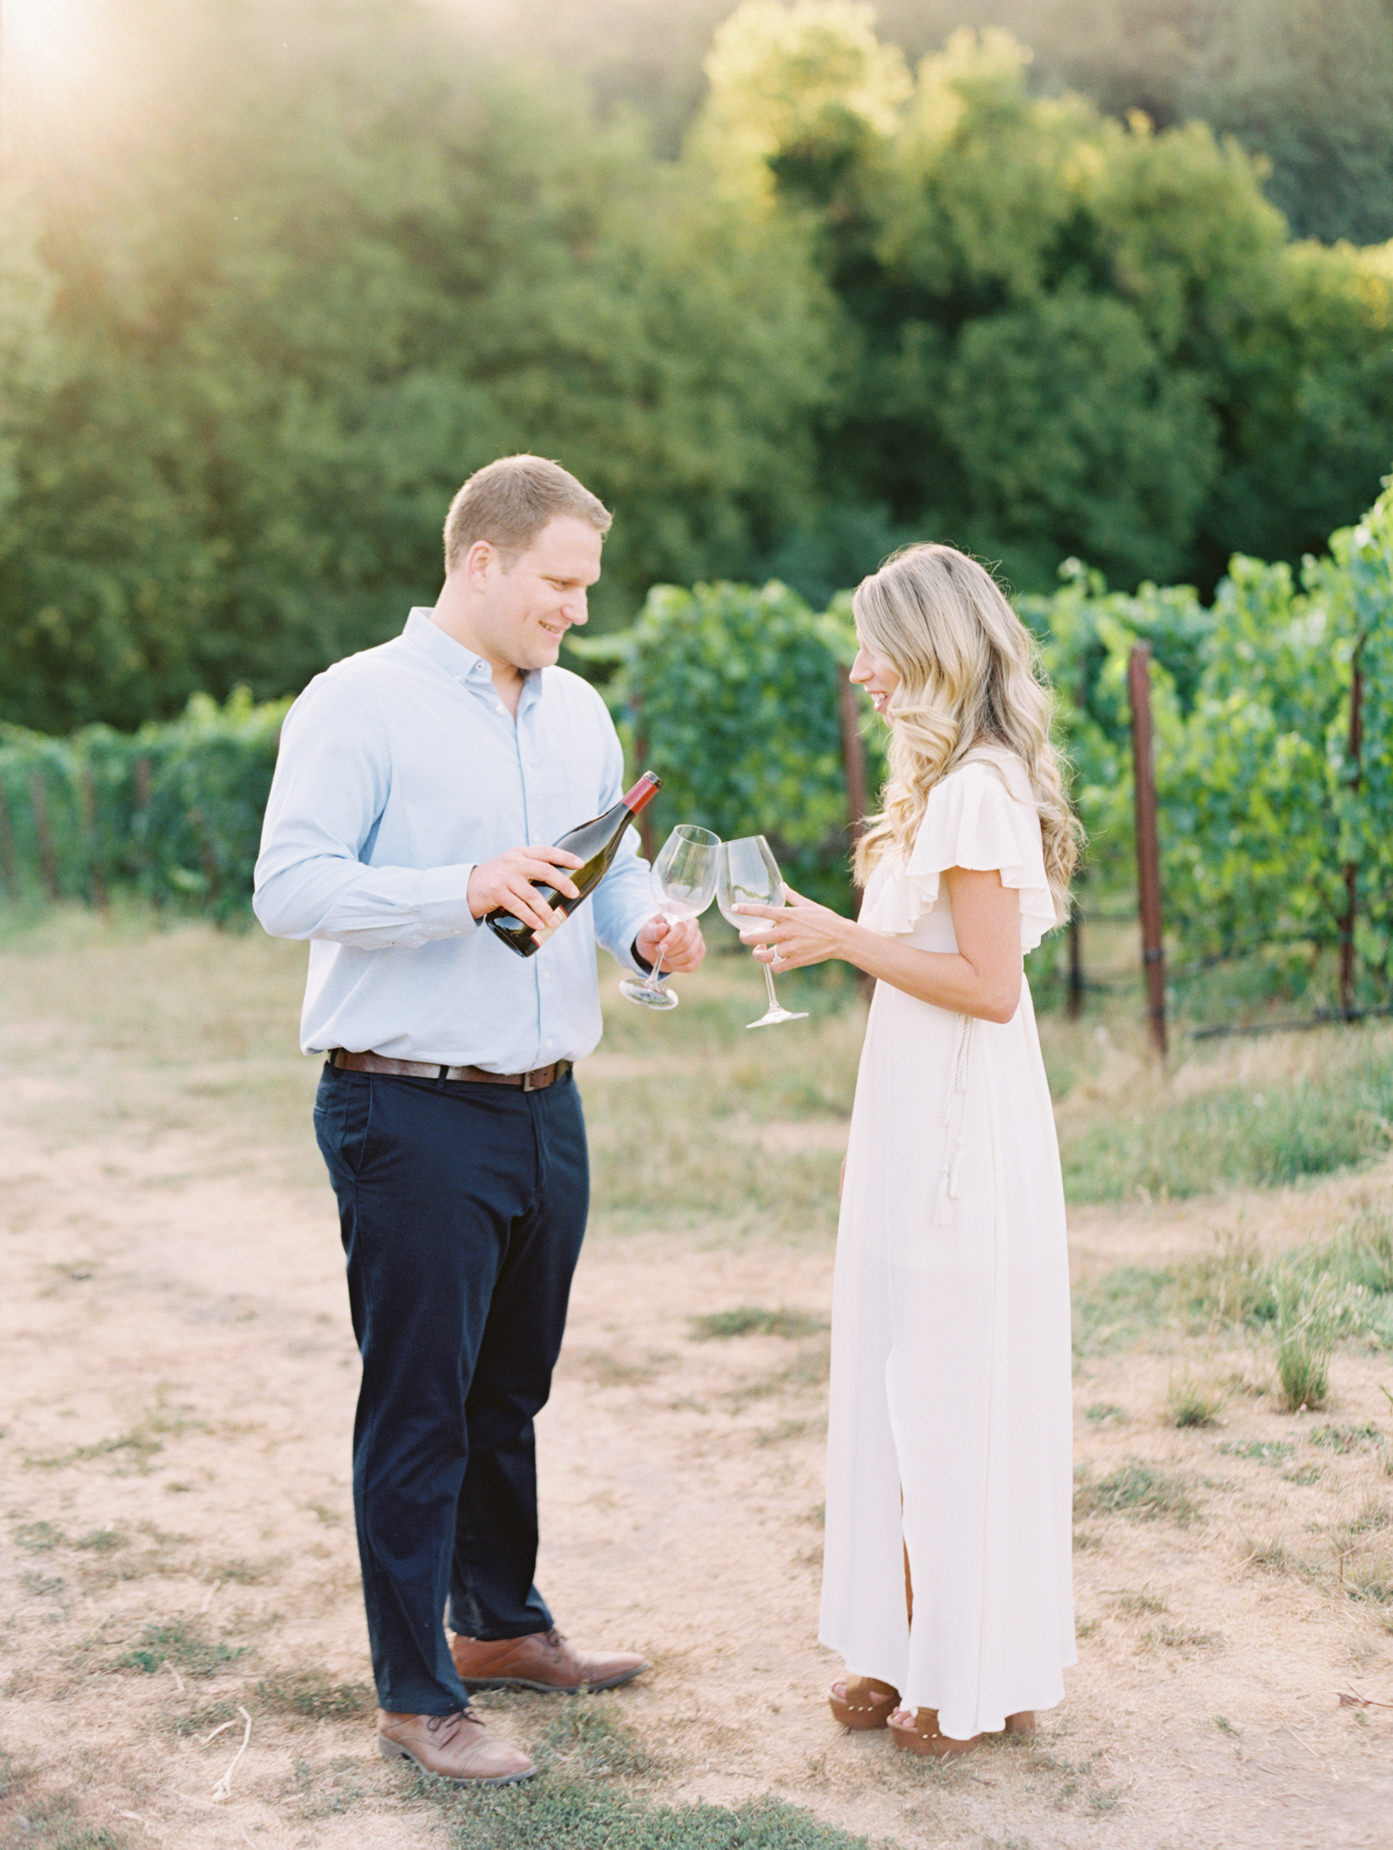 Engaged couple pouring wine at vineyard engagement at Williams Selyem Wines